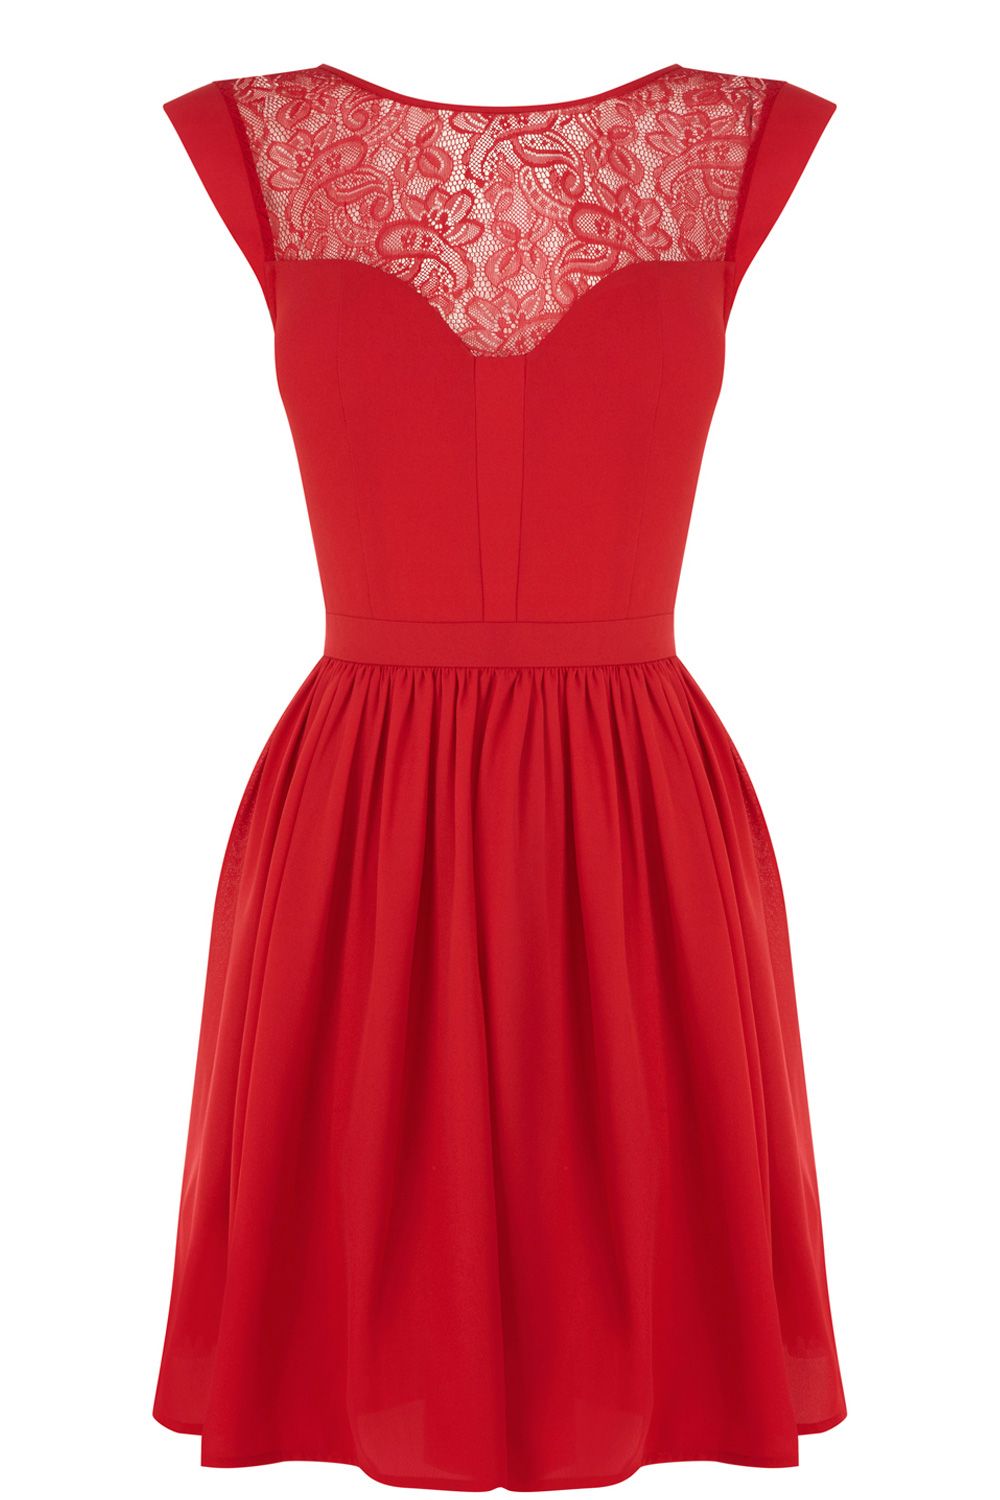 Oasis Abbey Lace Chiffon Skater Dres in Red | Lyst